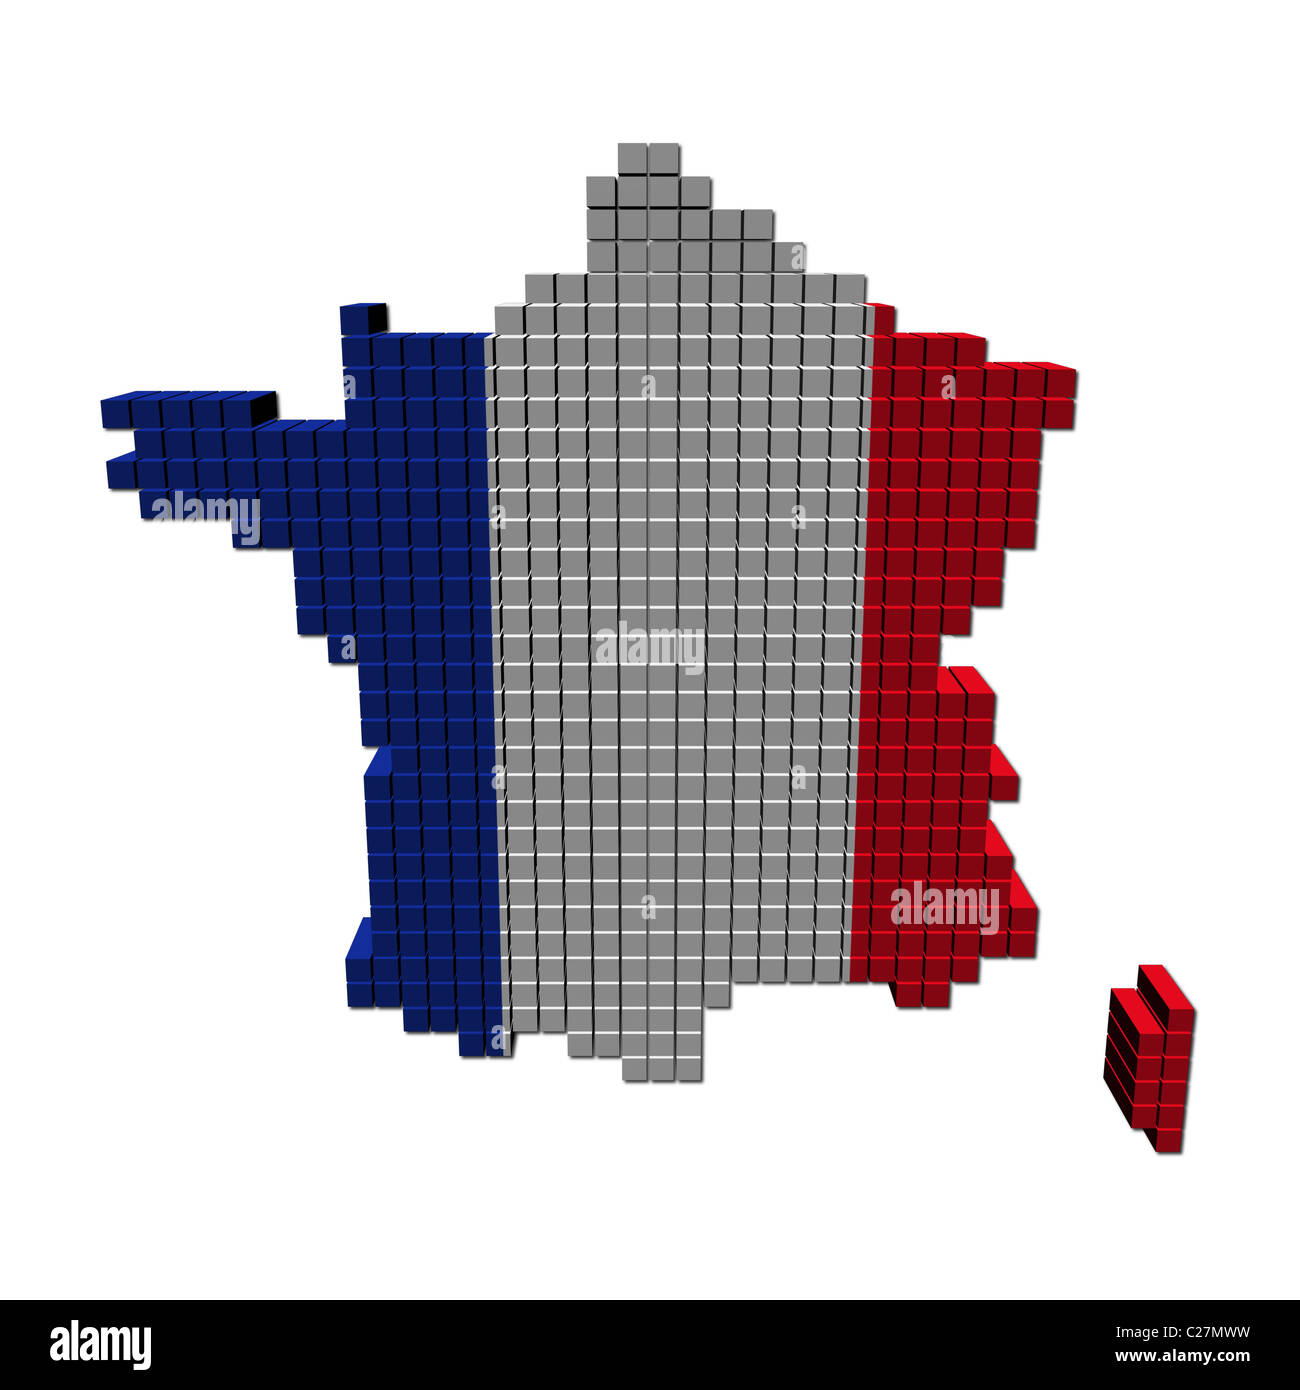 France map flag made of containers illustration Stock Photo